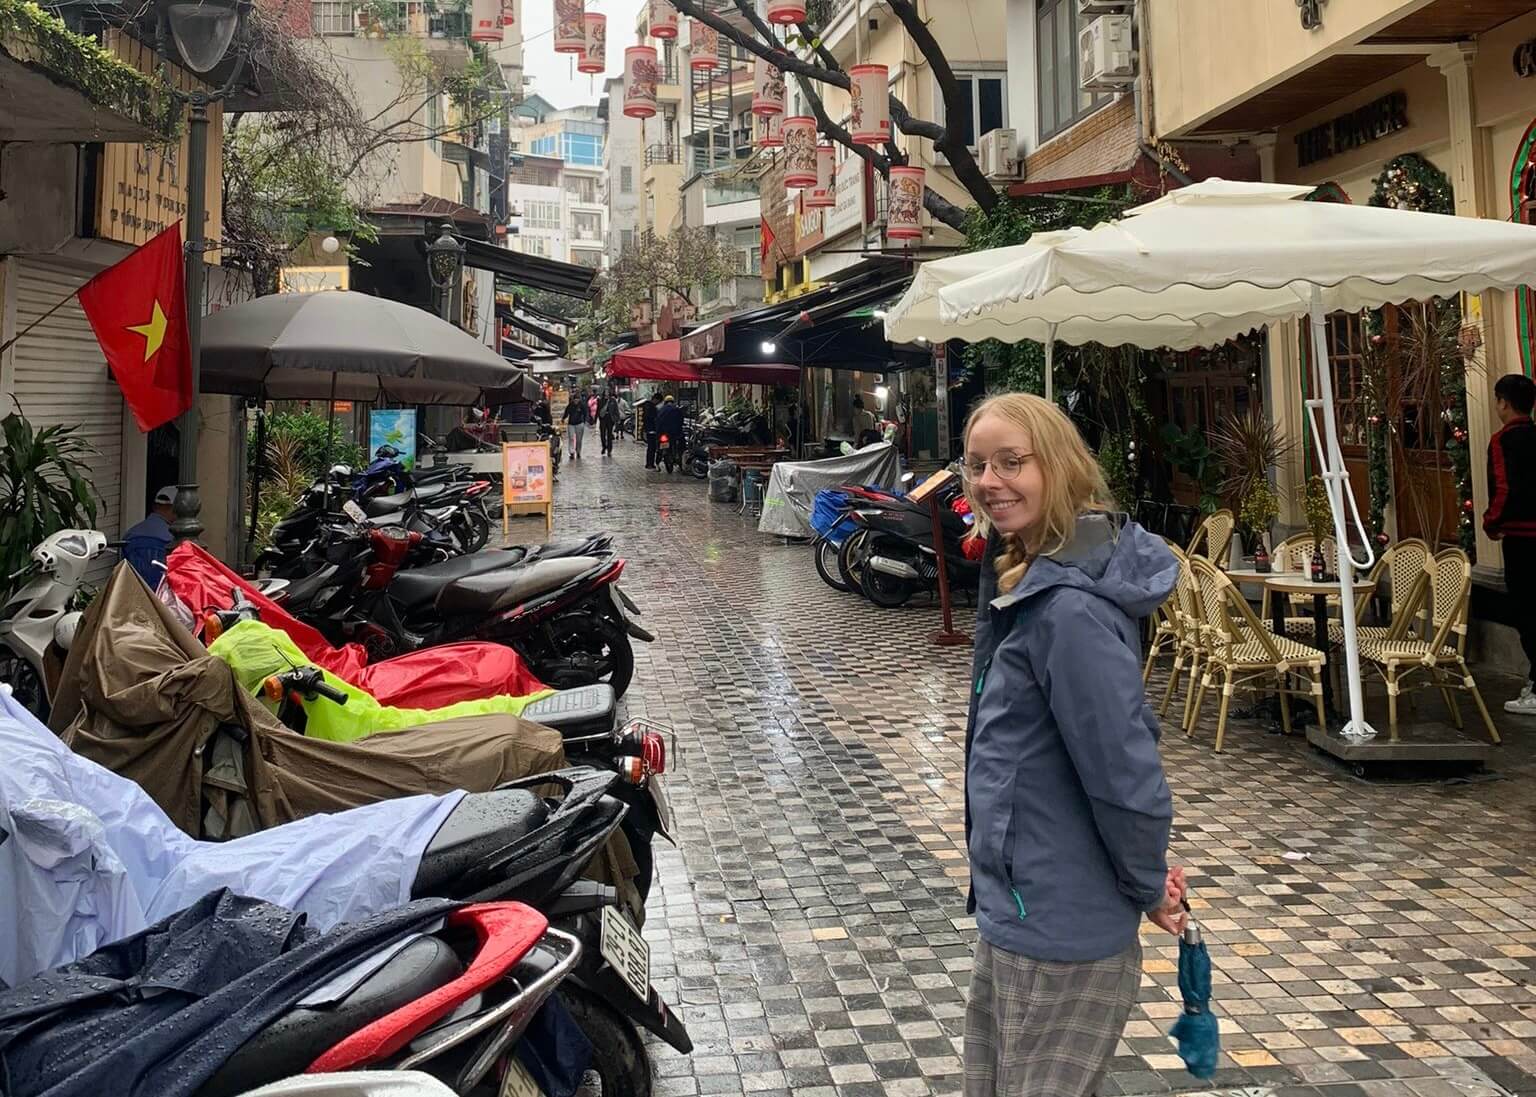 Laura smiling painfully in the wet steets of hanoi in front of motorbikes and restaurants